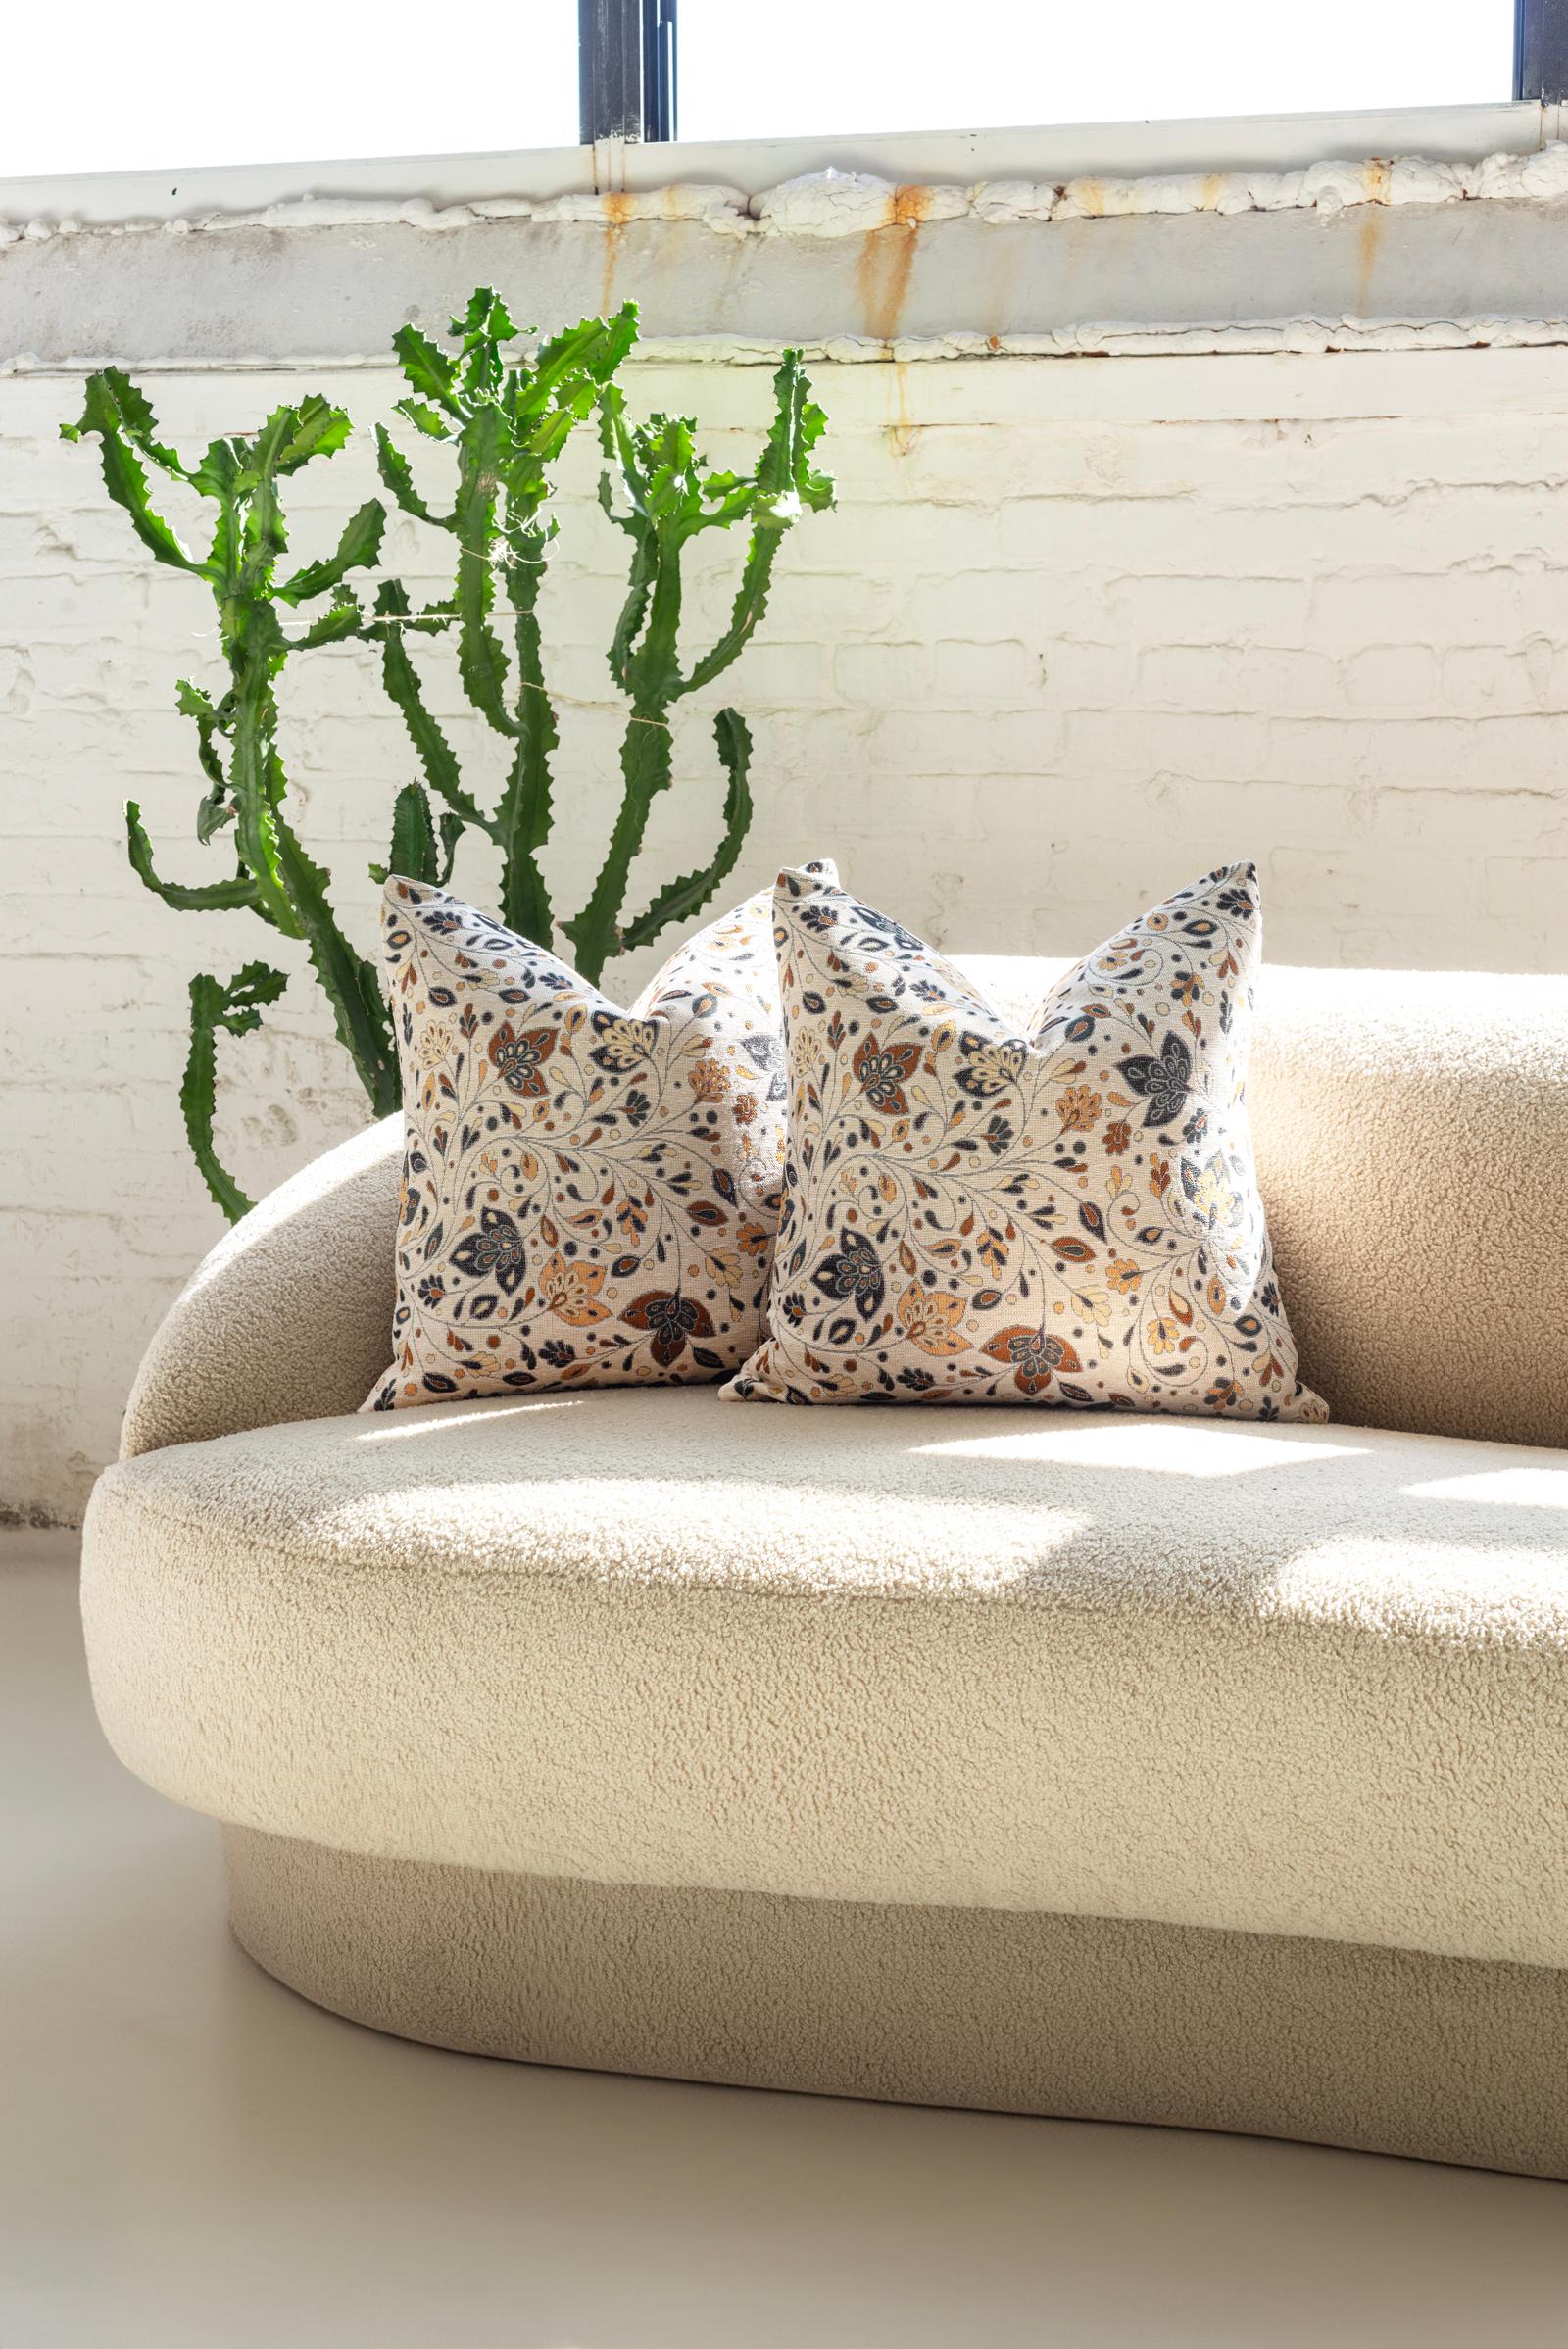 These luxurious down throw pillows, handcrafted with care in Chicago, feature a unique tapestry-like fabric that radiates comfort and style. The white background of the fabric serves as a serene canvas, beautifully contrasting with a whimsical,